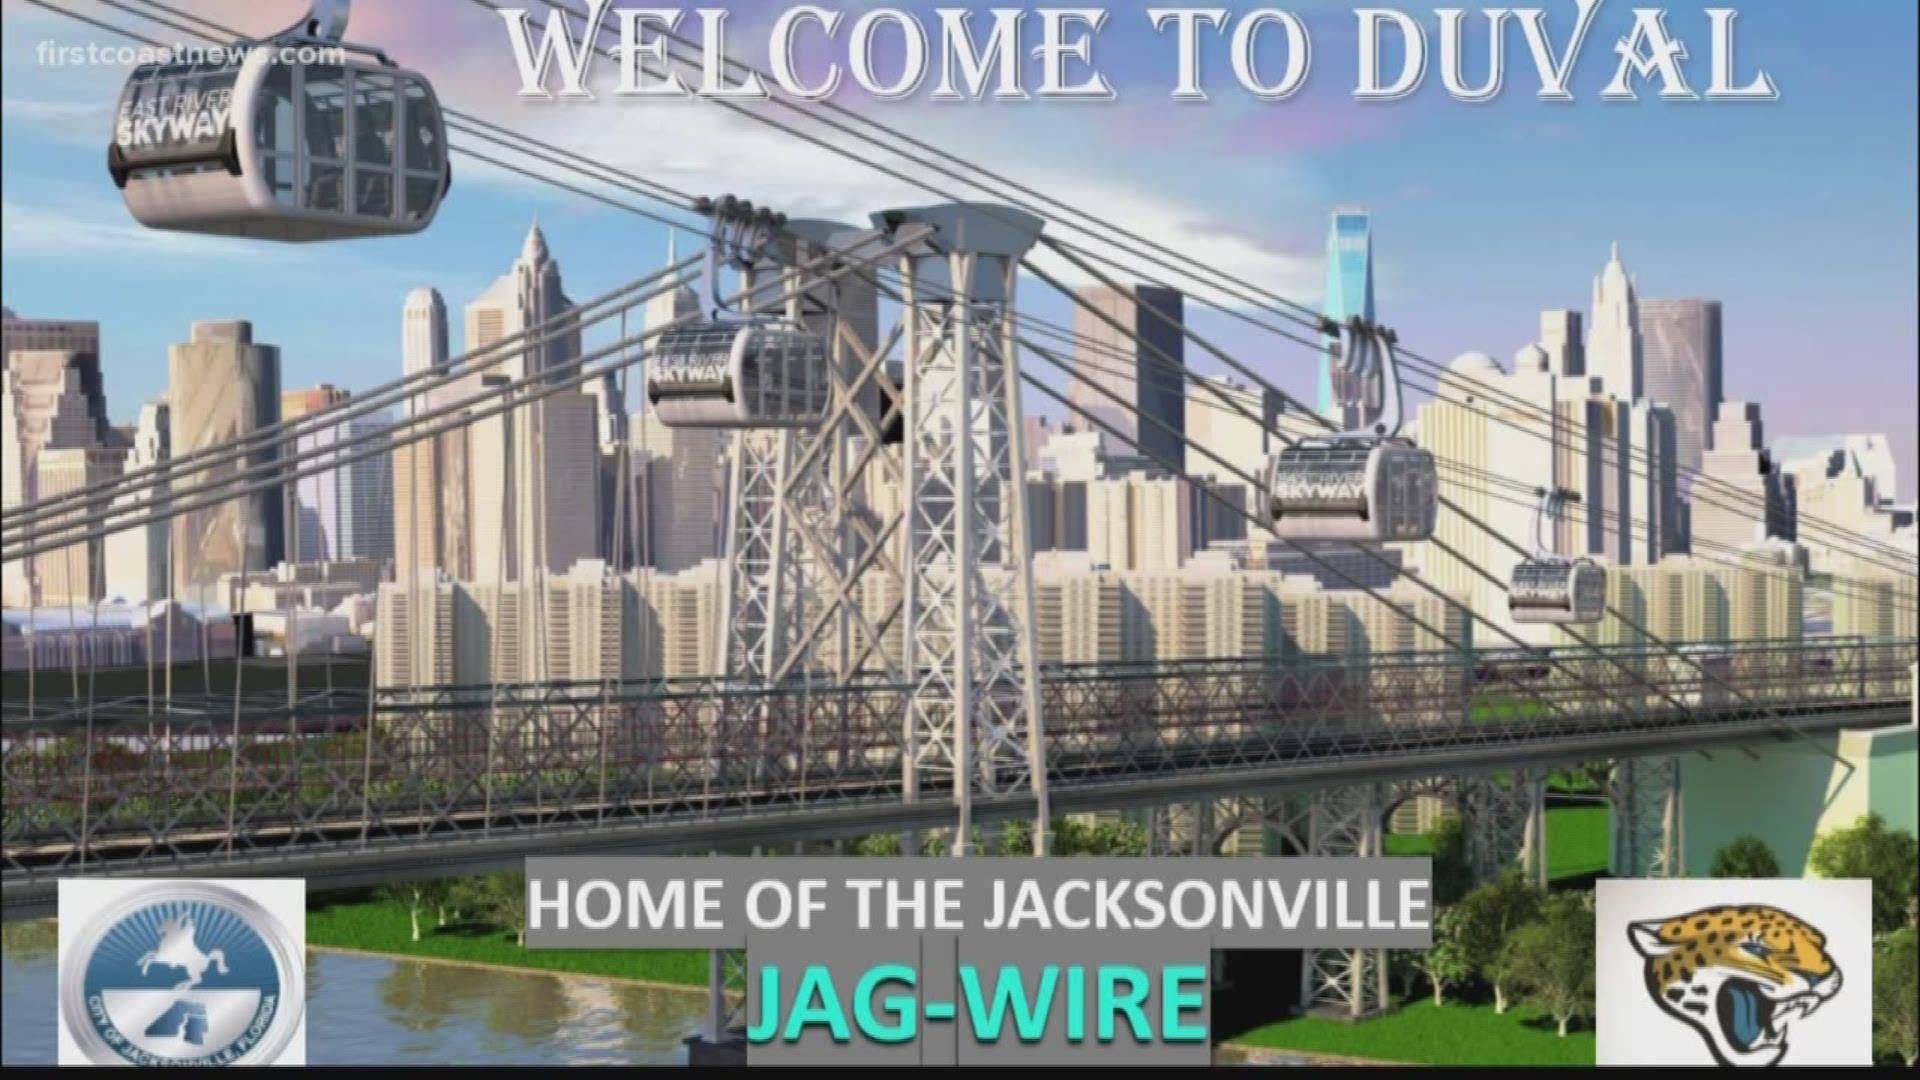 A Jacksonville developer wants to build a "gondola life" to take riders across the St. Johns River.